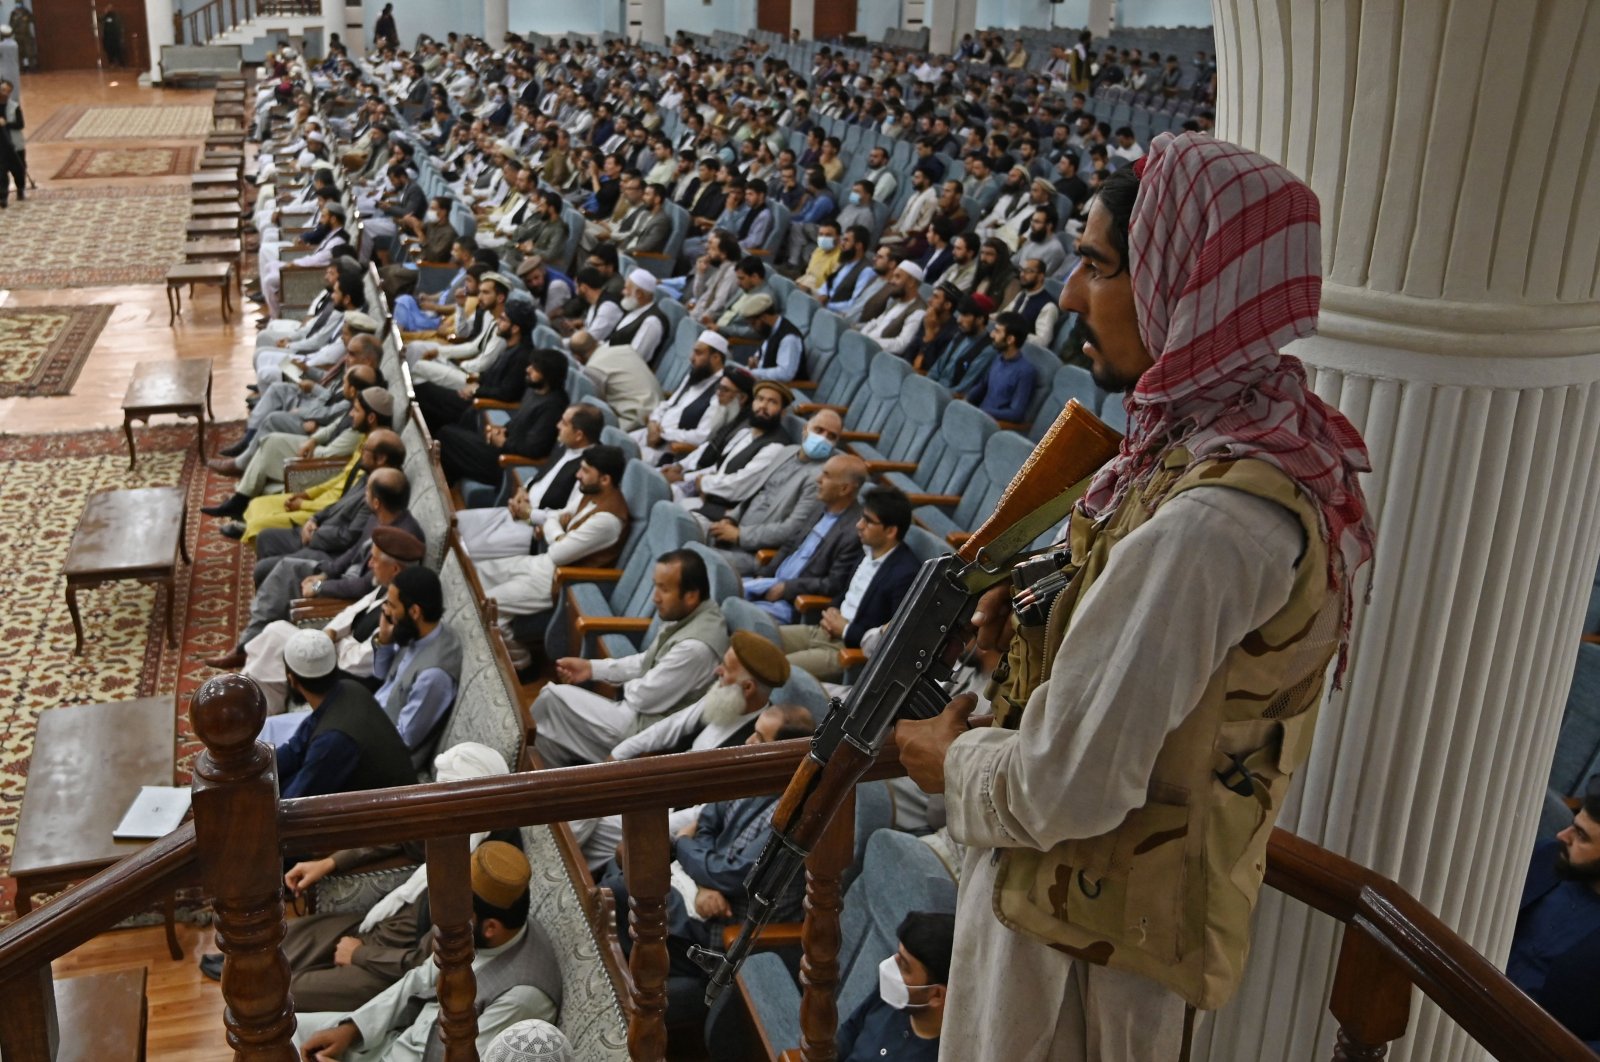 A Taliban fighter stands guard as acting Higher Education Minister Abdul Baqi Haqqani addresses a gathering during a consultative meeting on Taliban's general higher education policies at the Loya Jirga Hall in Kabu, Afghanistan, on Aug. 29, 2021. (Aamir QURESHI / AFP)